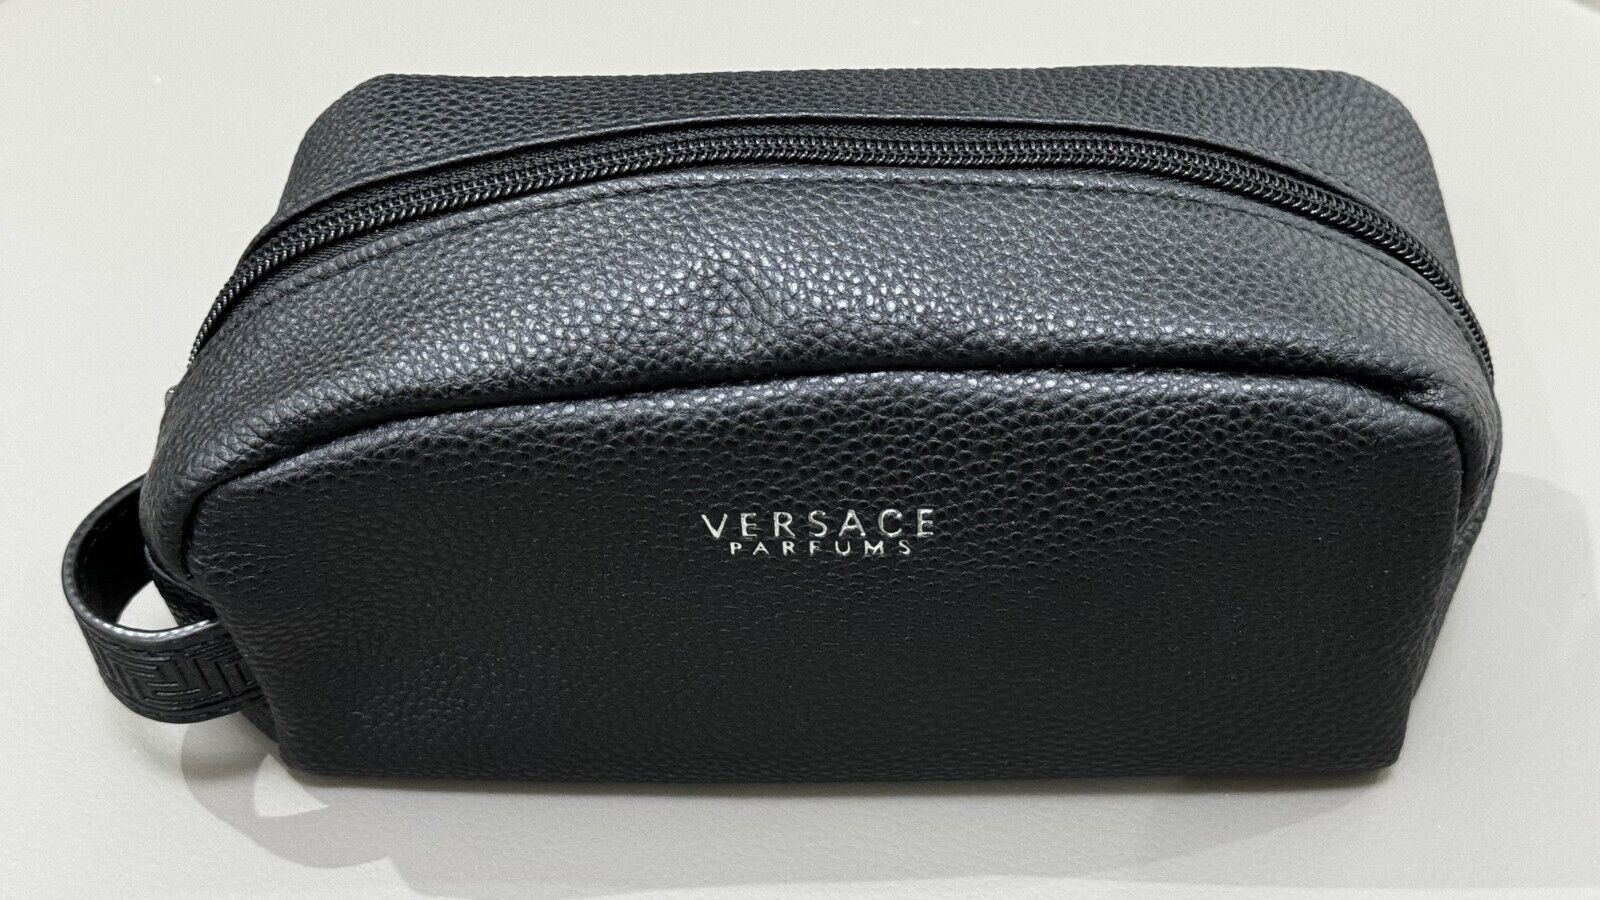 VERSACE for Turkish Airlines Business Class Travel Amenity Kit Brand New Sealed